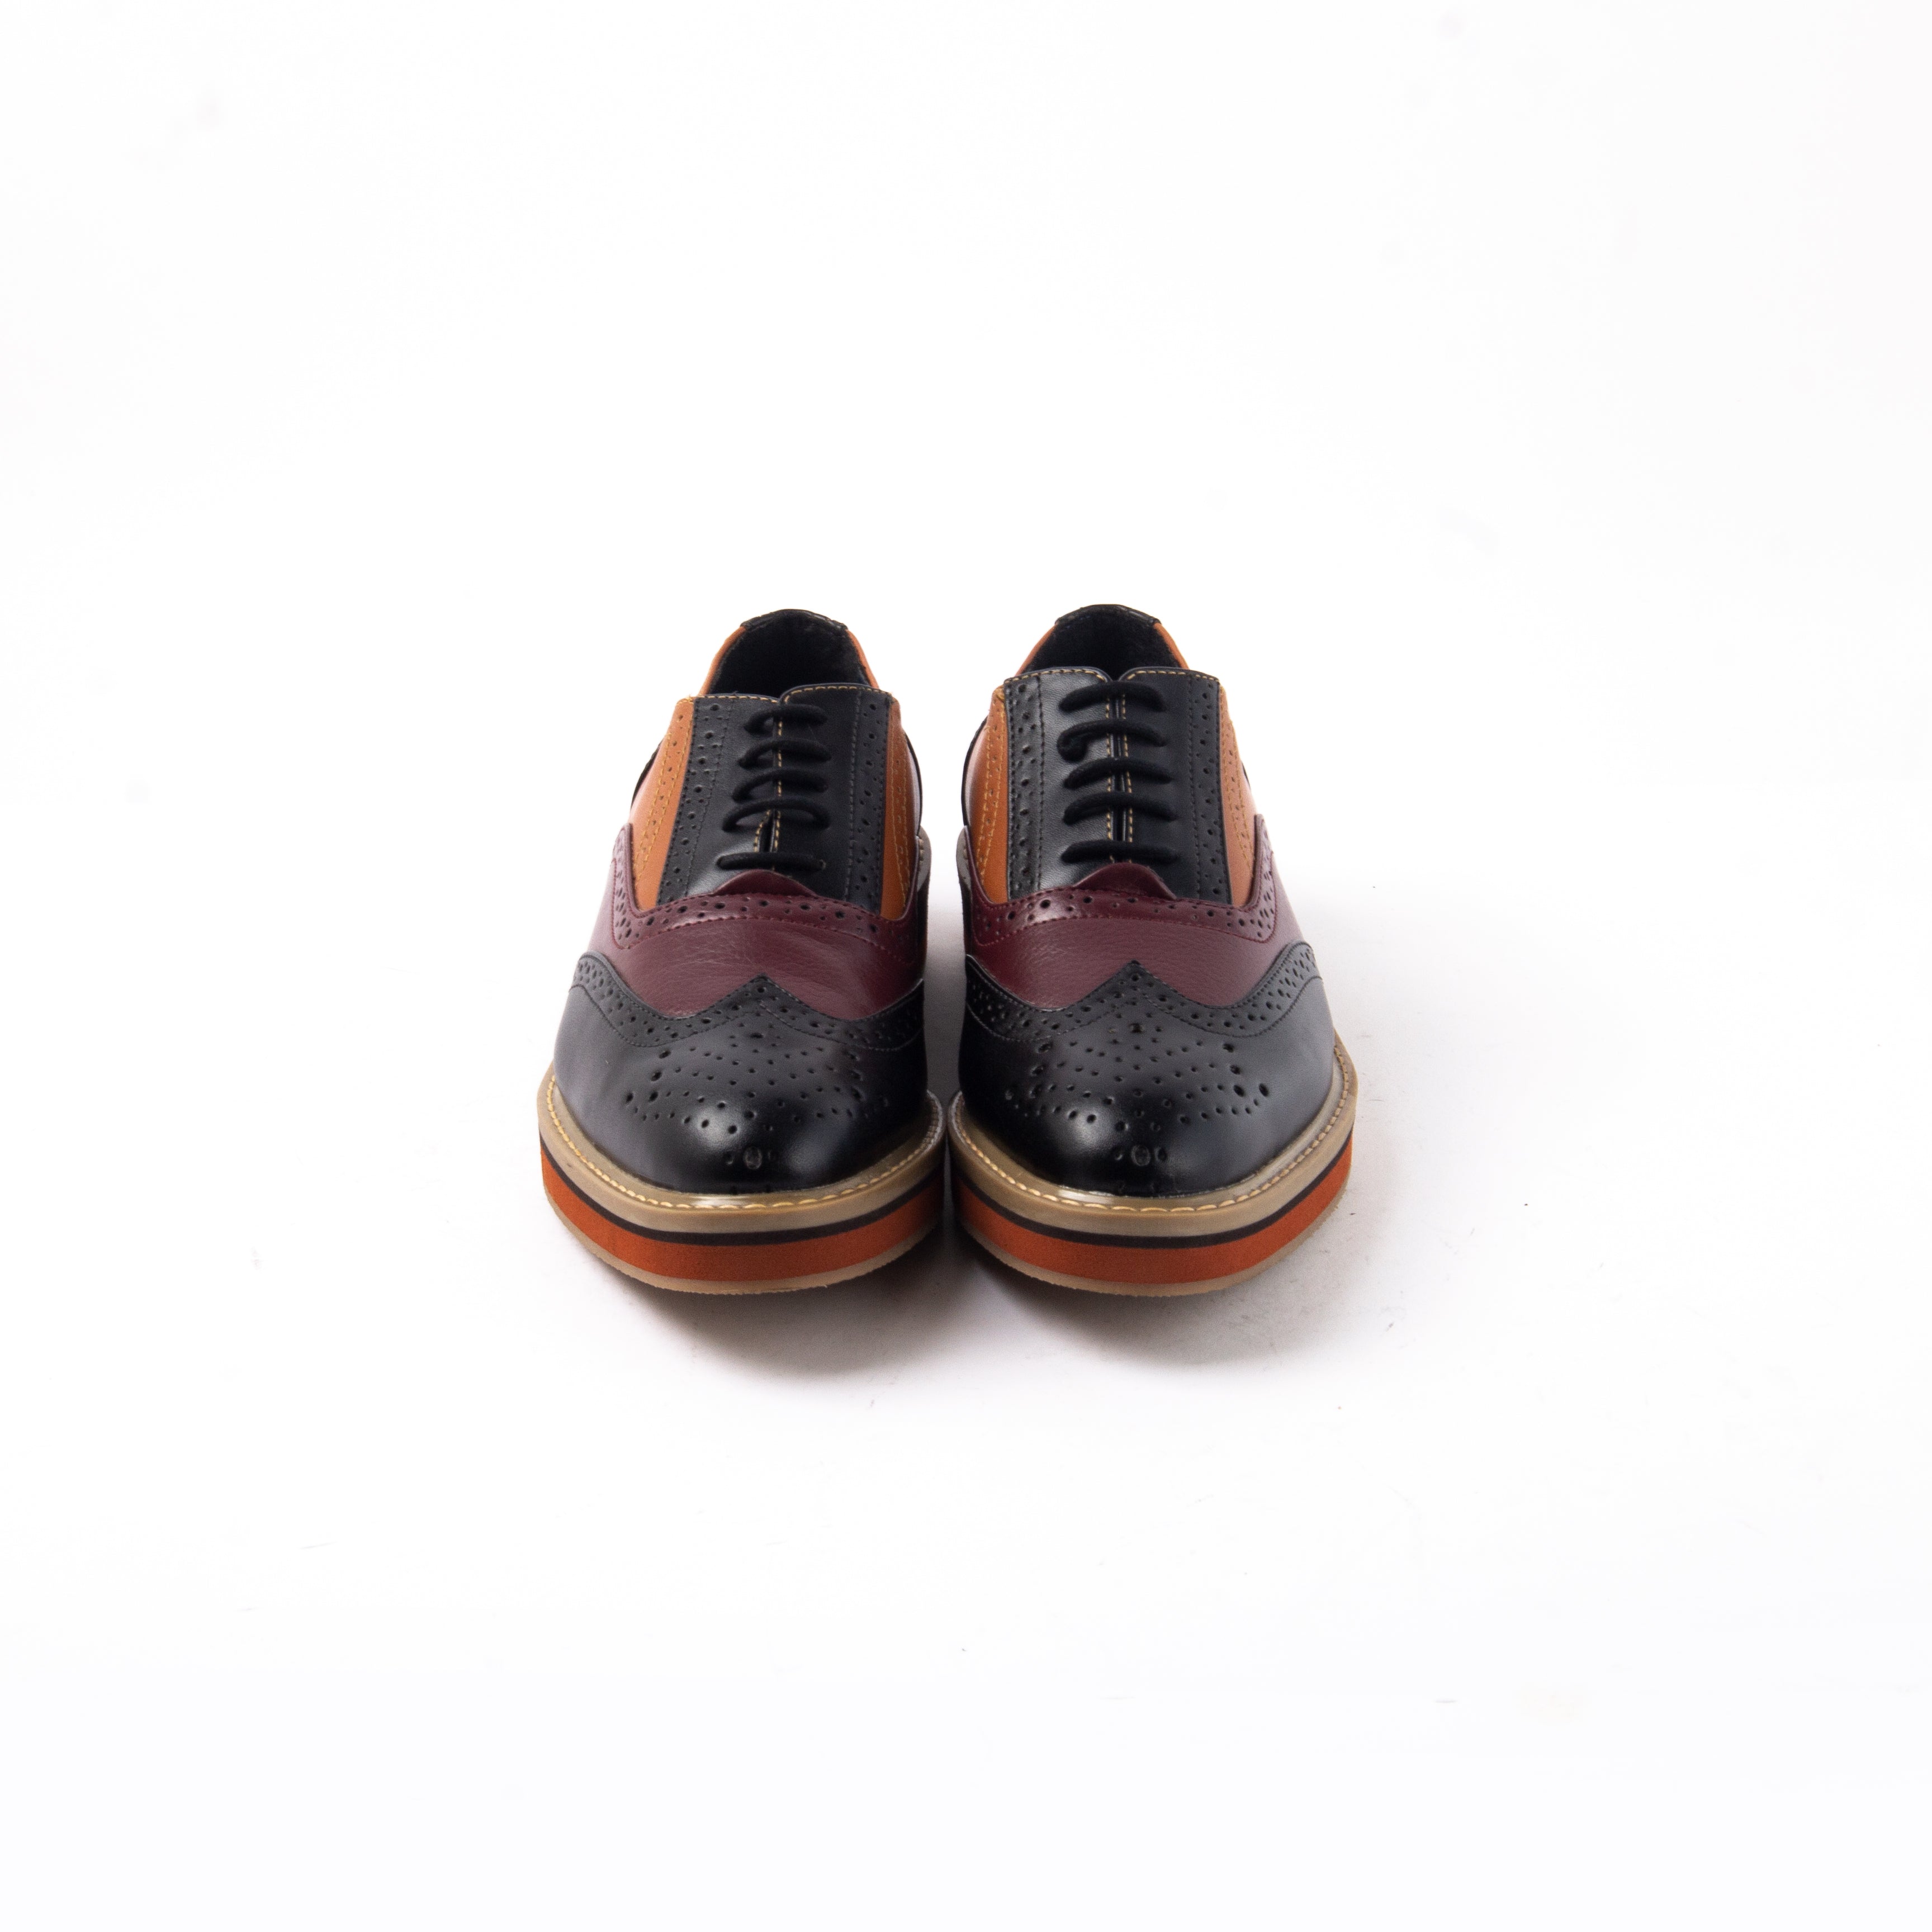 Beverly Tricolour Brogues - Black